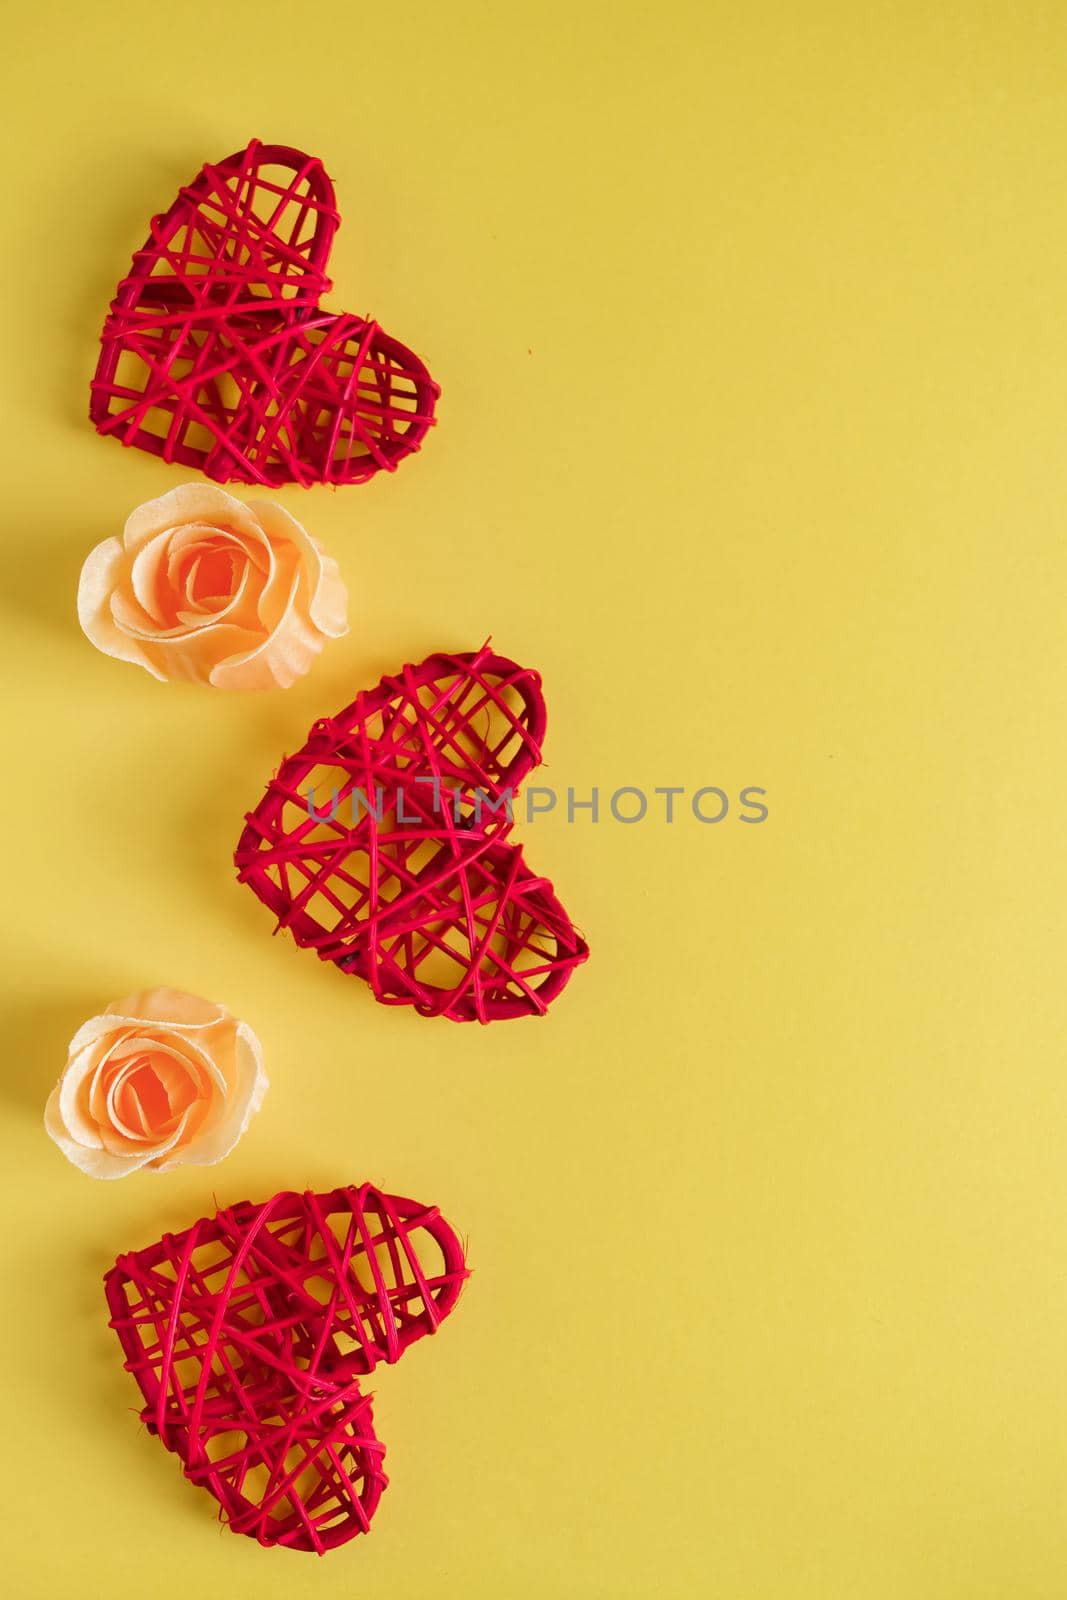 Red hearts and flowers on a yellow background. Greeting card design for Valentine's Day. Place for text, vertical photo.